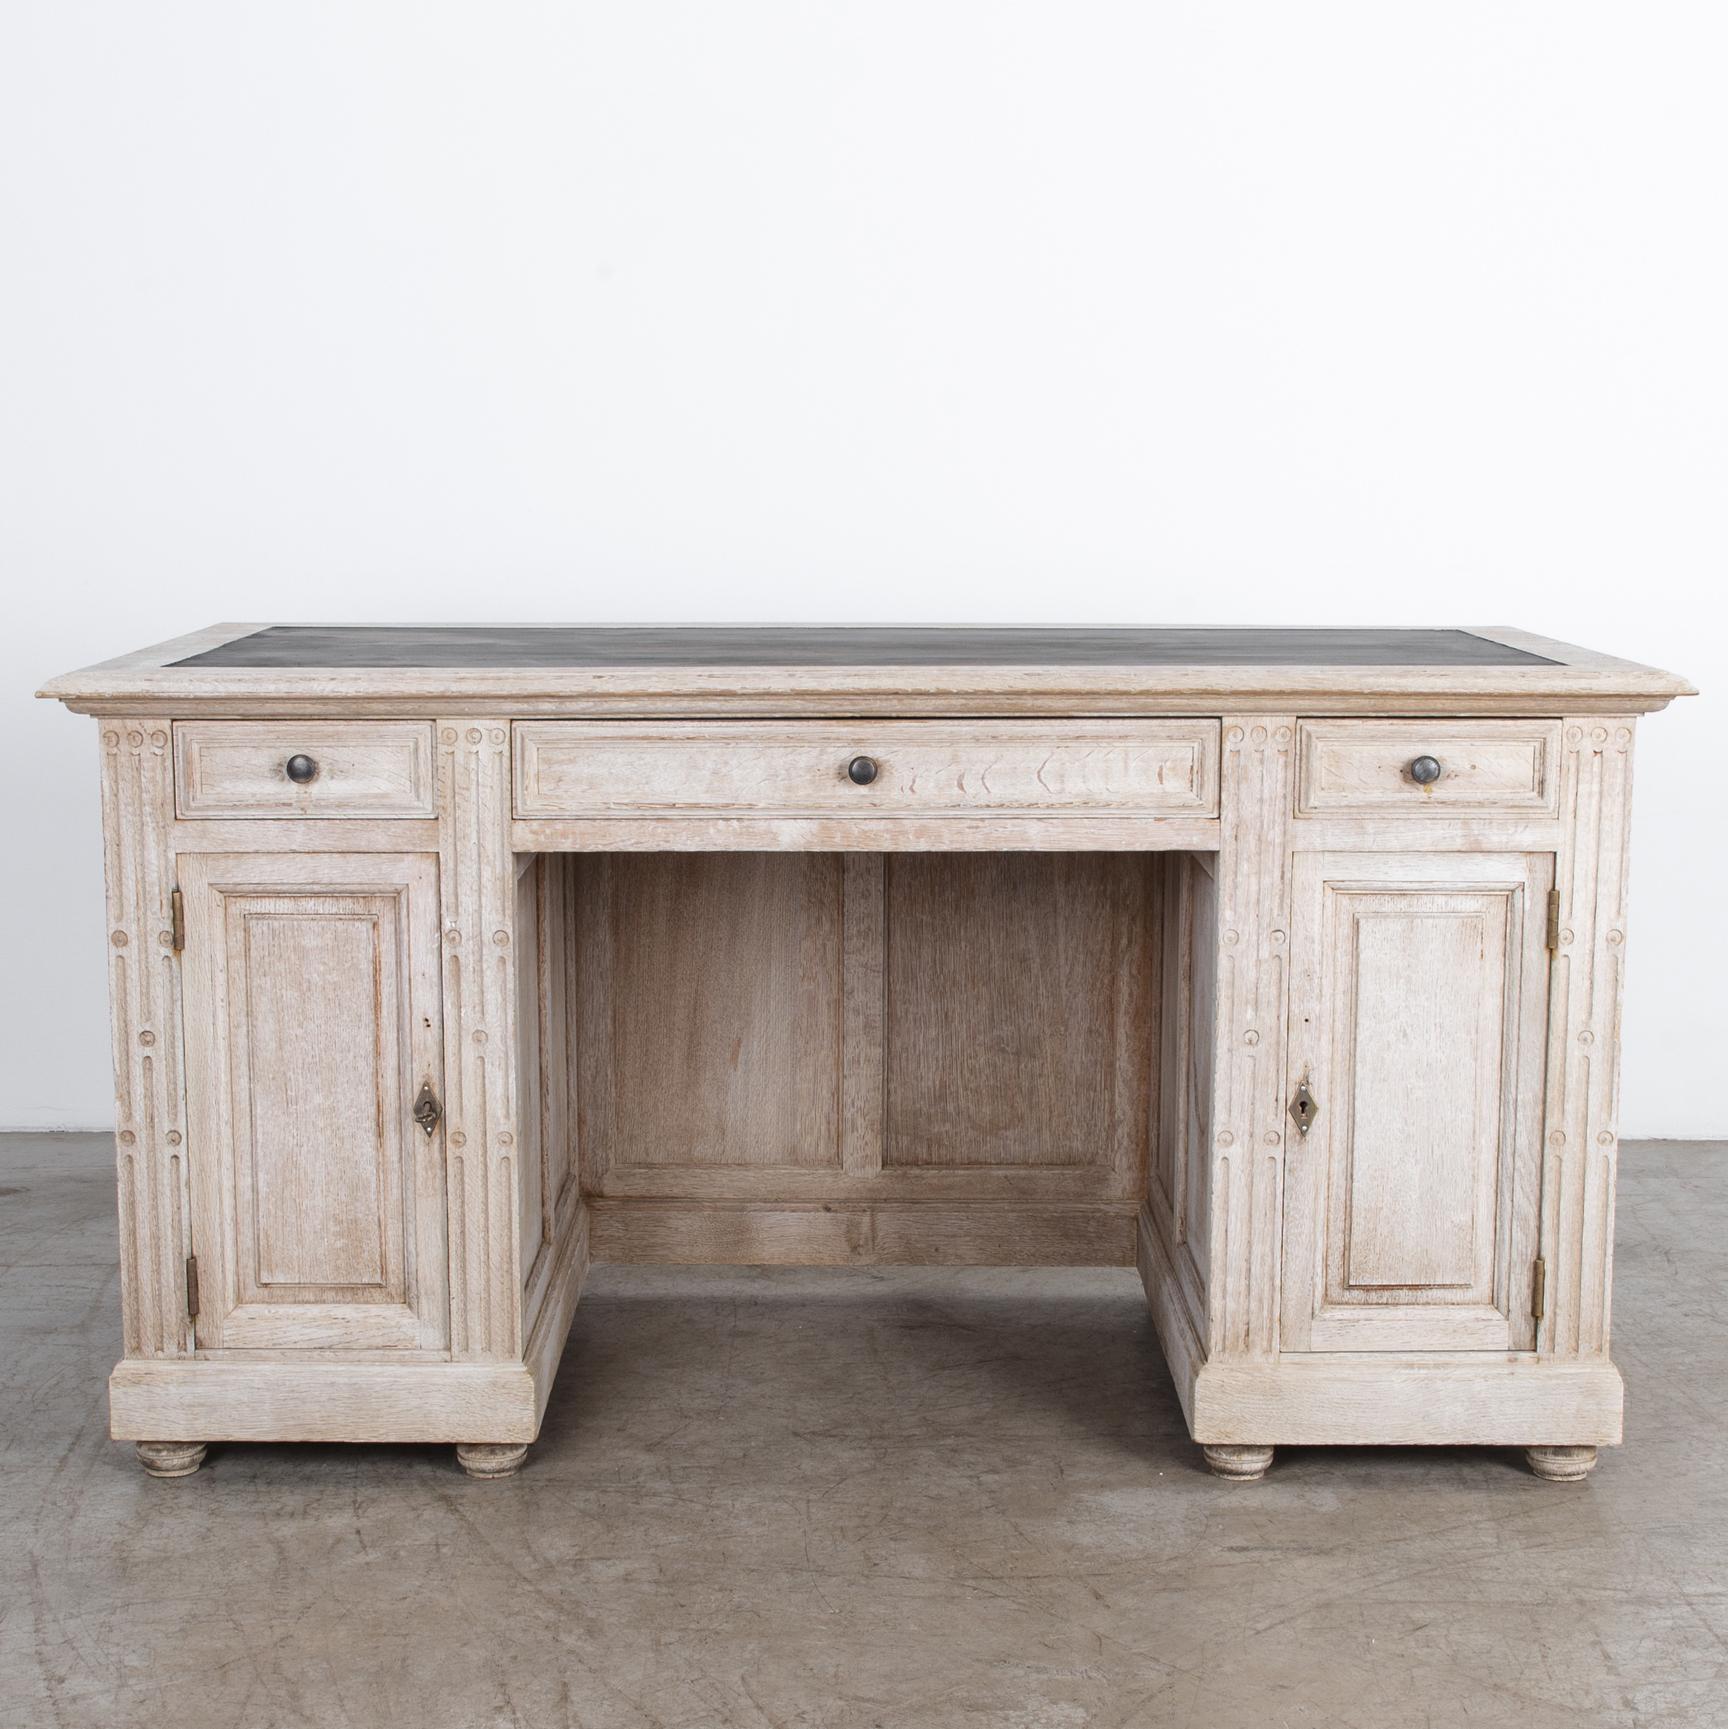 A French desk from circa 1800. Crisp geometry is rendered with traditional
carpentry techniques in this elegant design. Carved with distinctive geometric
ornament, and resting on round wooden feet. A light finish highlights the wood’s
texture and